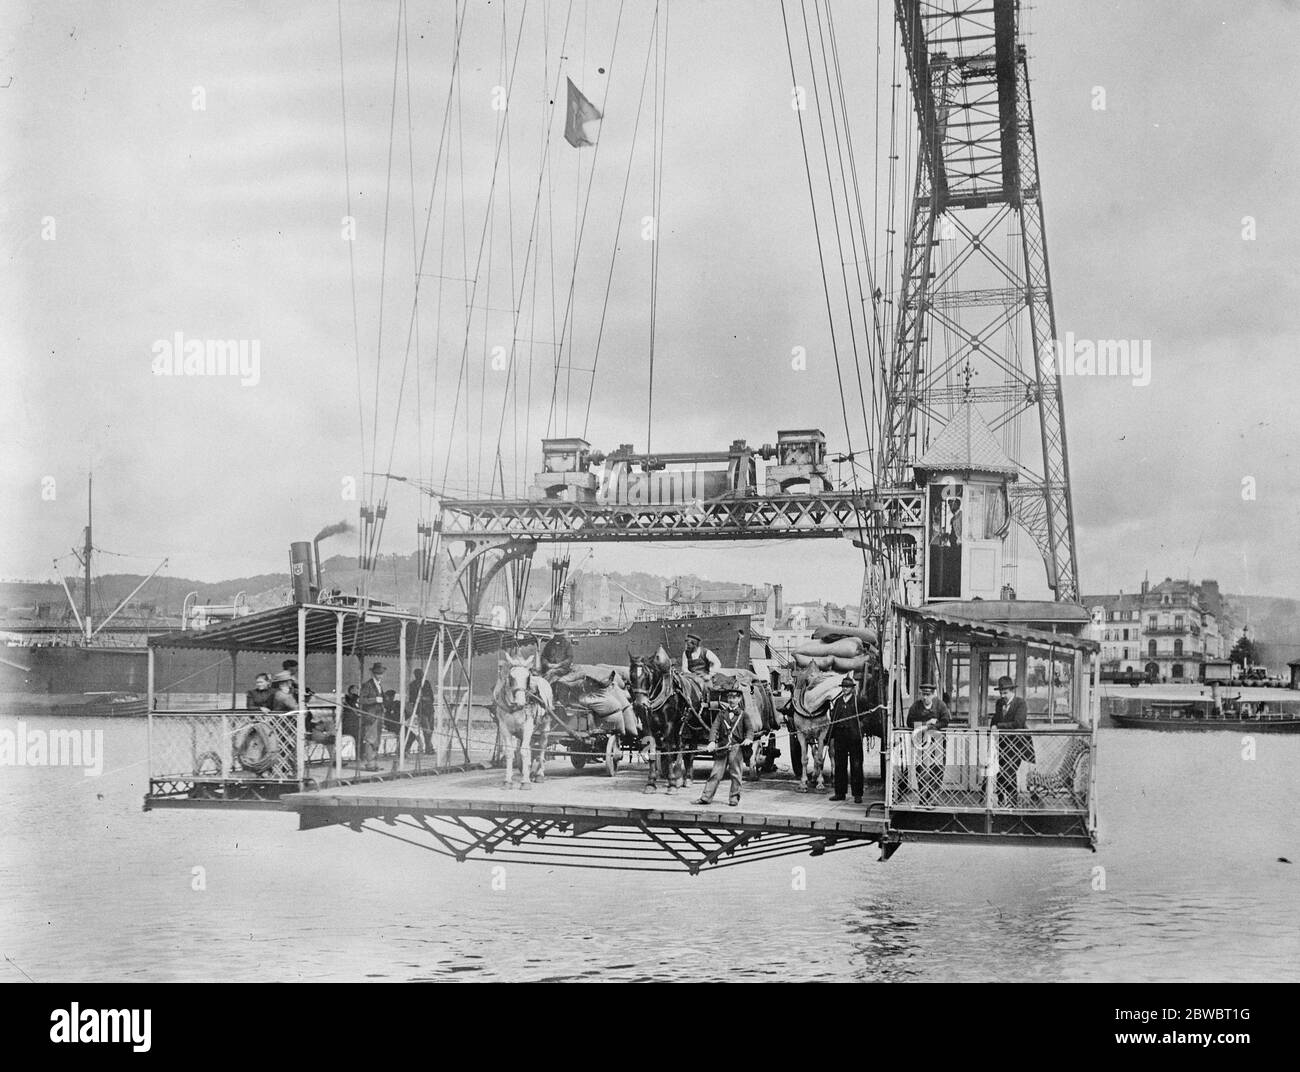 Rouen 's most useful bridge . An interesting picture of the great  Transbordeur  across the Seine . The picture shows passengers and vehicular traffic about to arrive on the left bank . 21 January 1925 Stock Photo